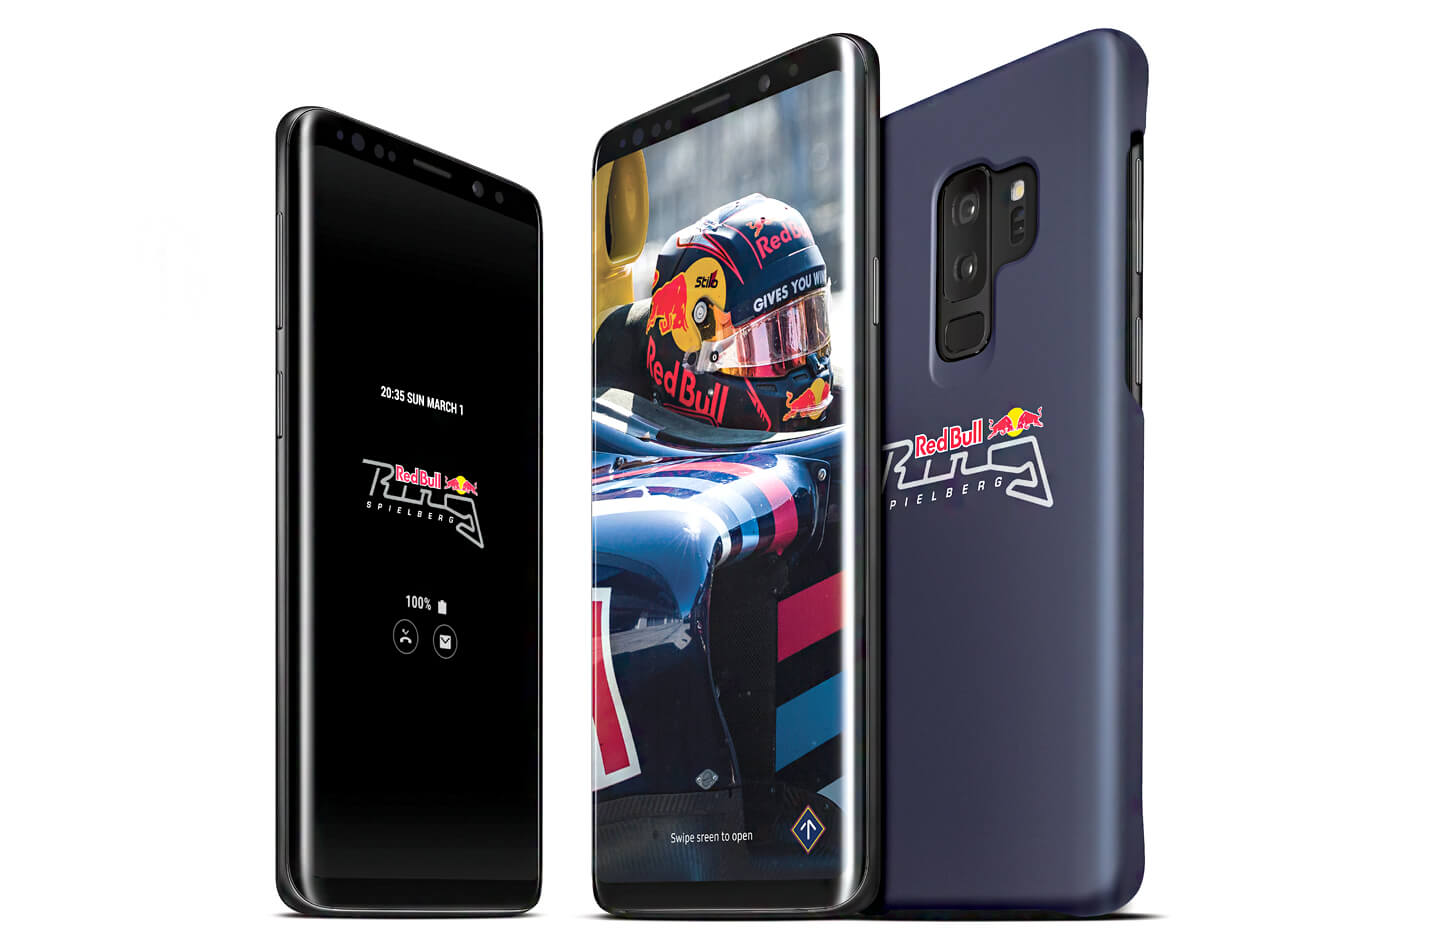 Galaxy S9 Limited Edition smartphone